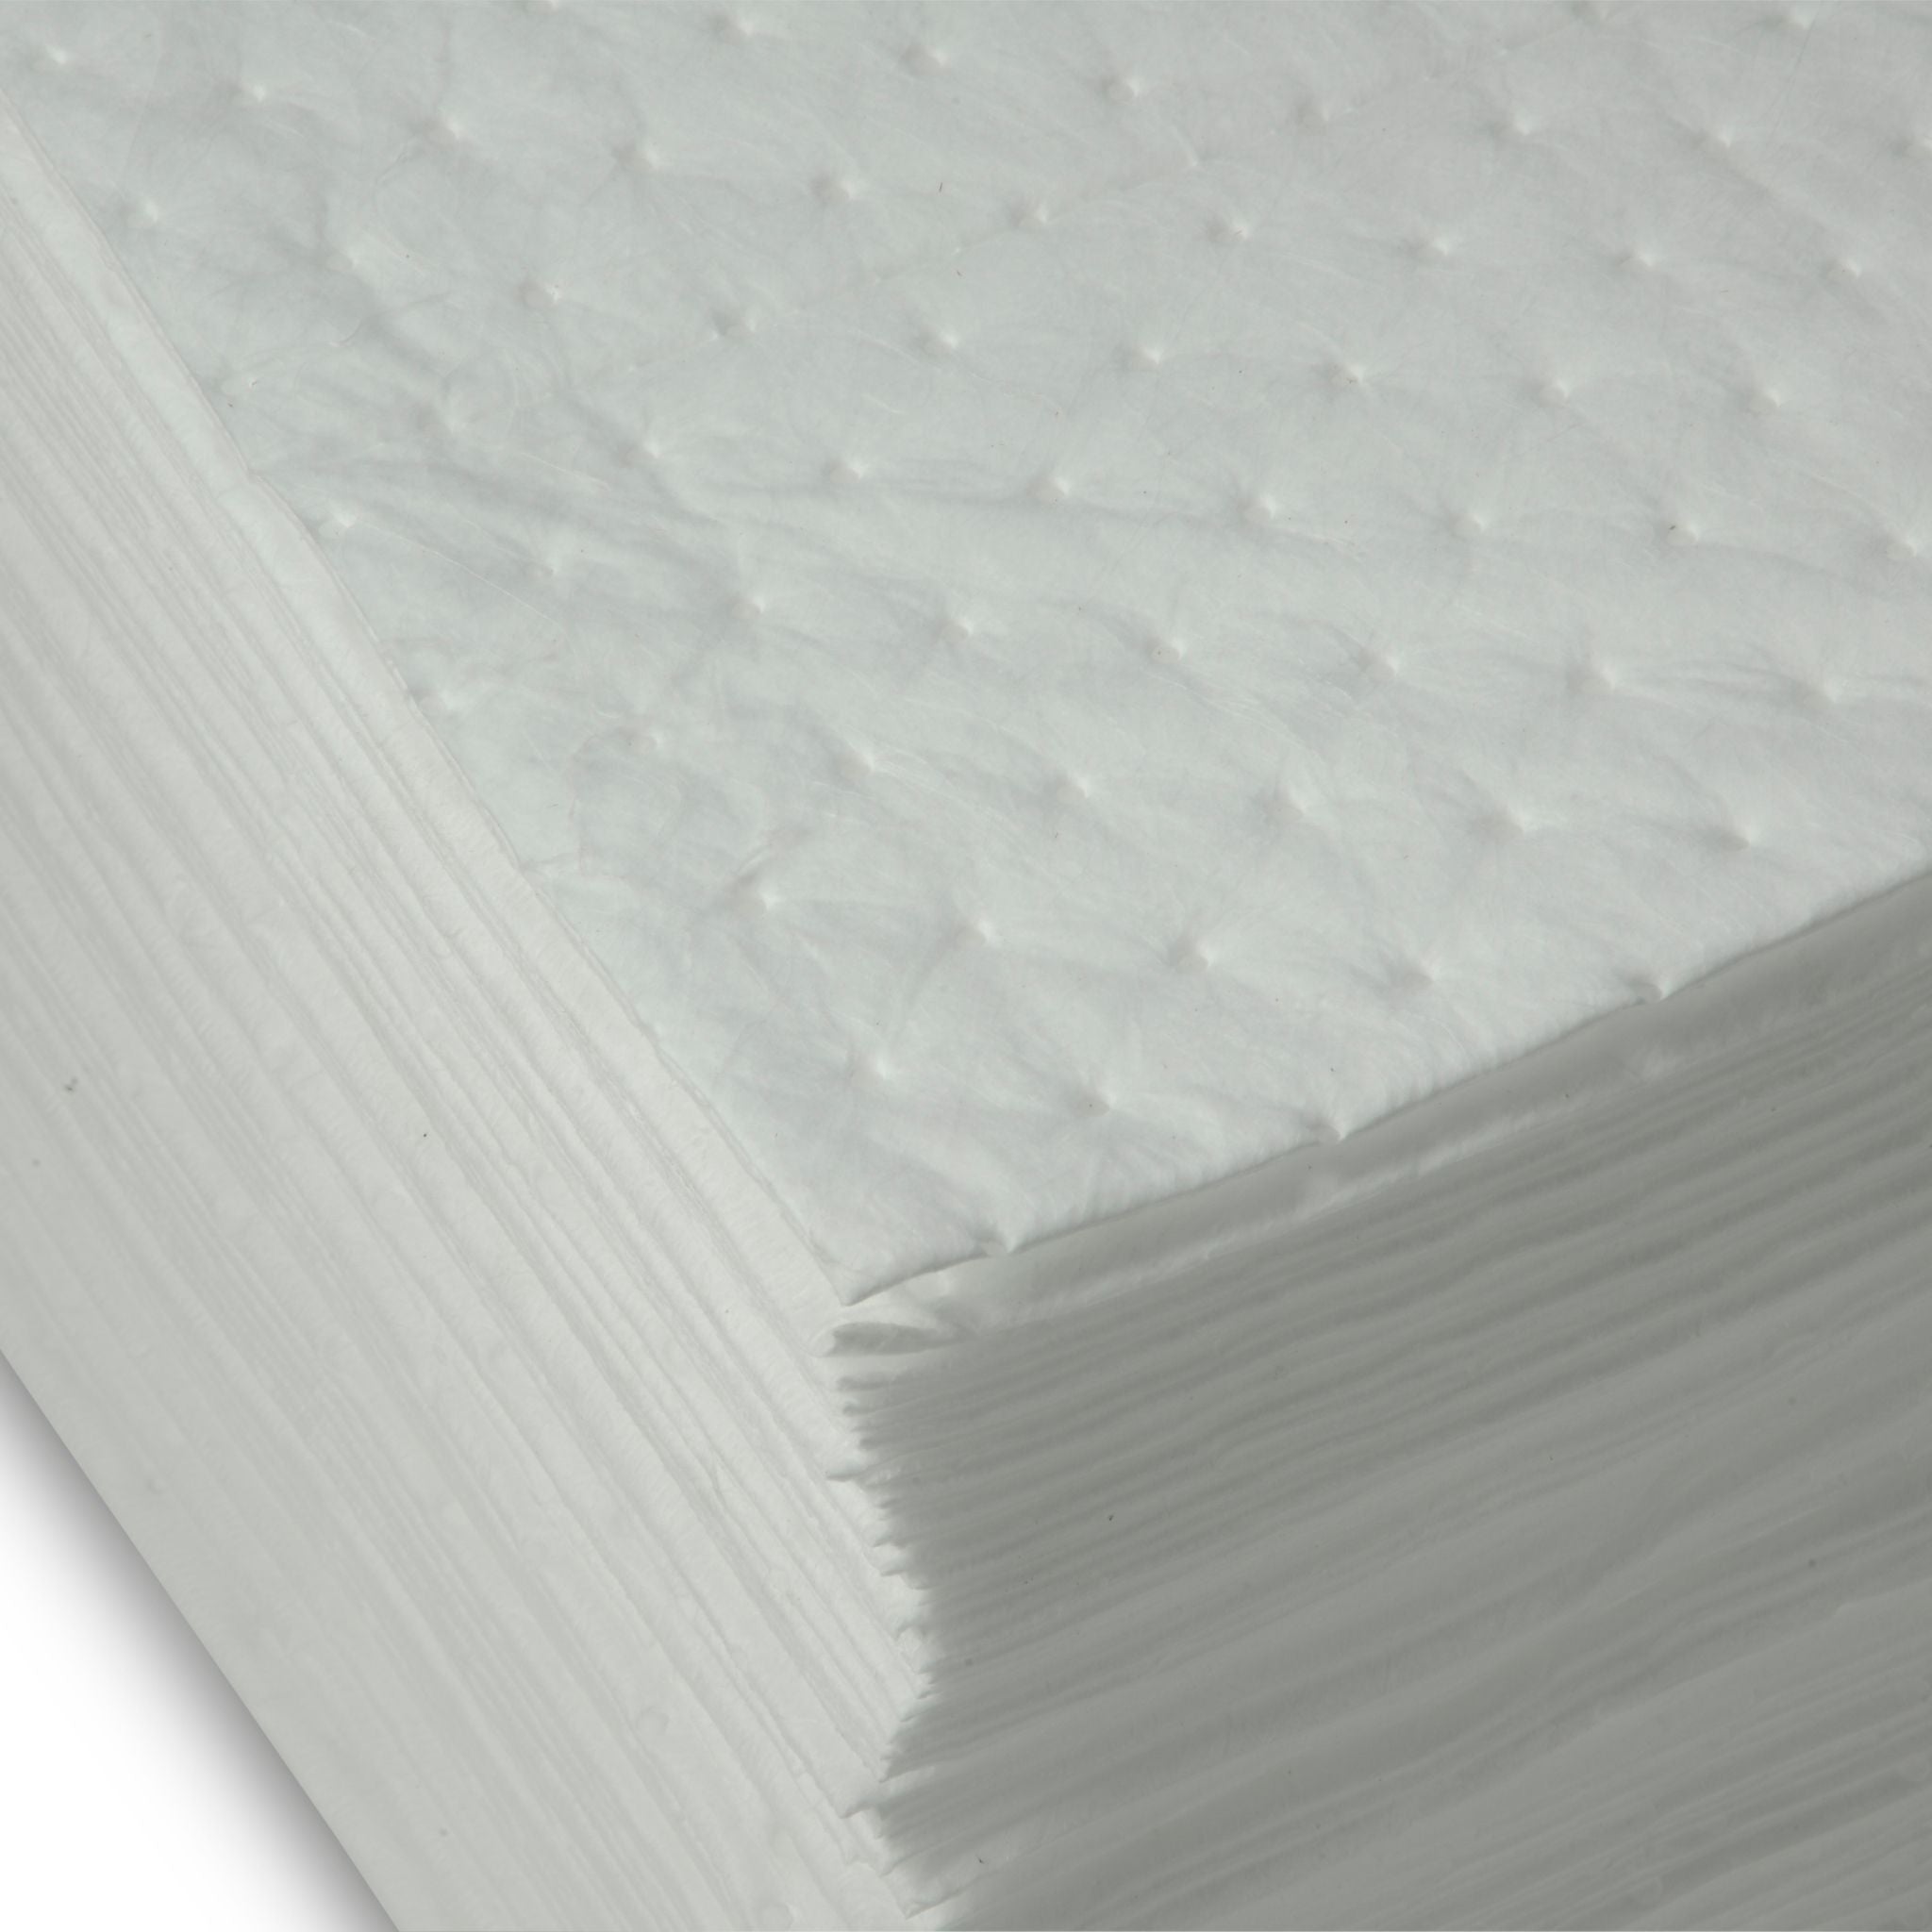 AABACO Oil ONLY White Absorbent Pads - Dimpled LIGHT Weight Pads – 15”x 18”